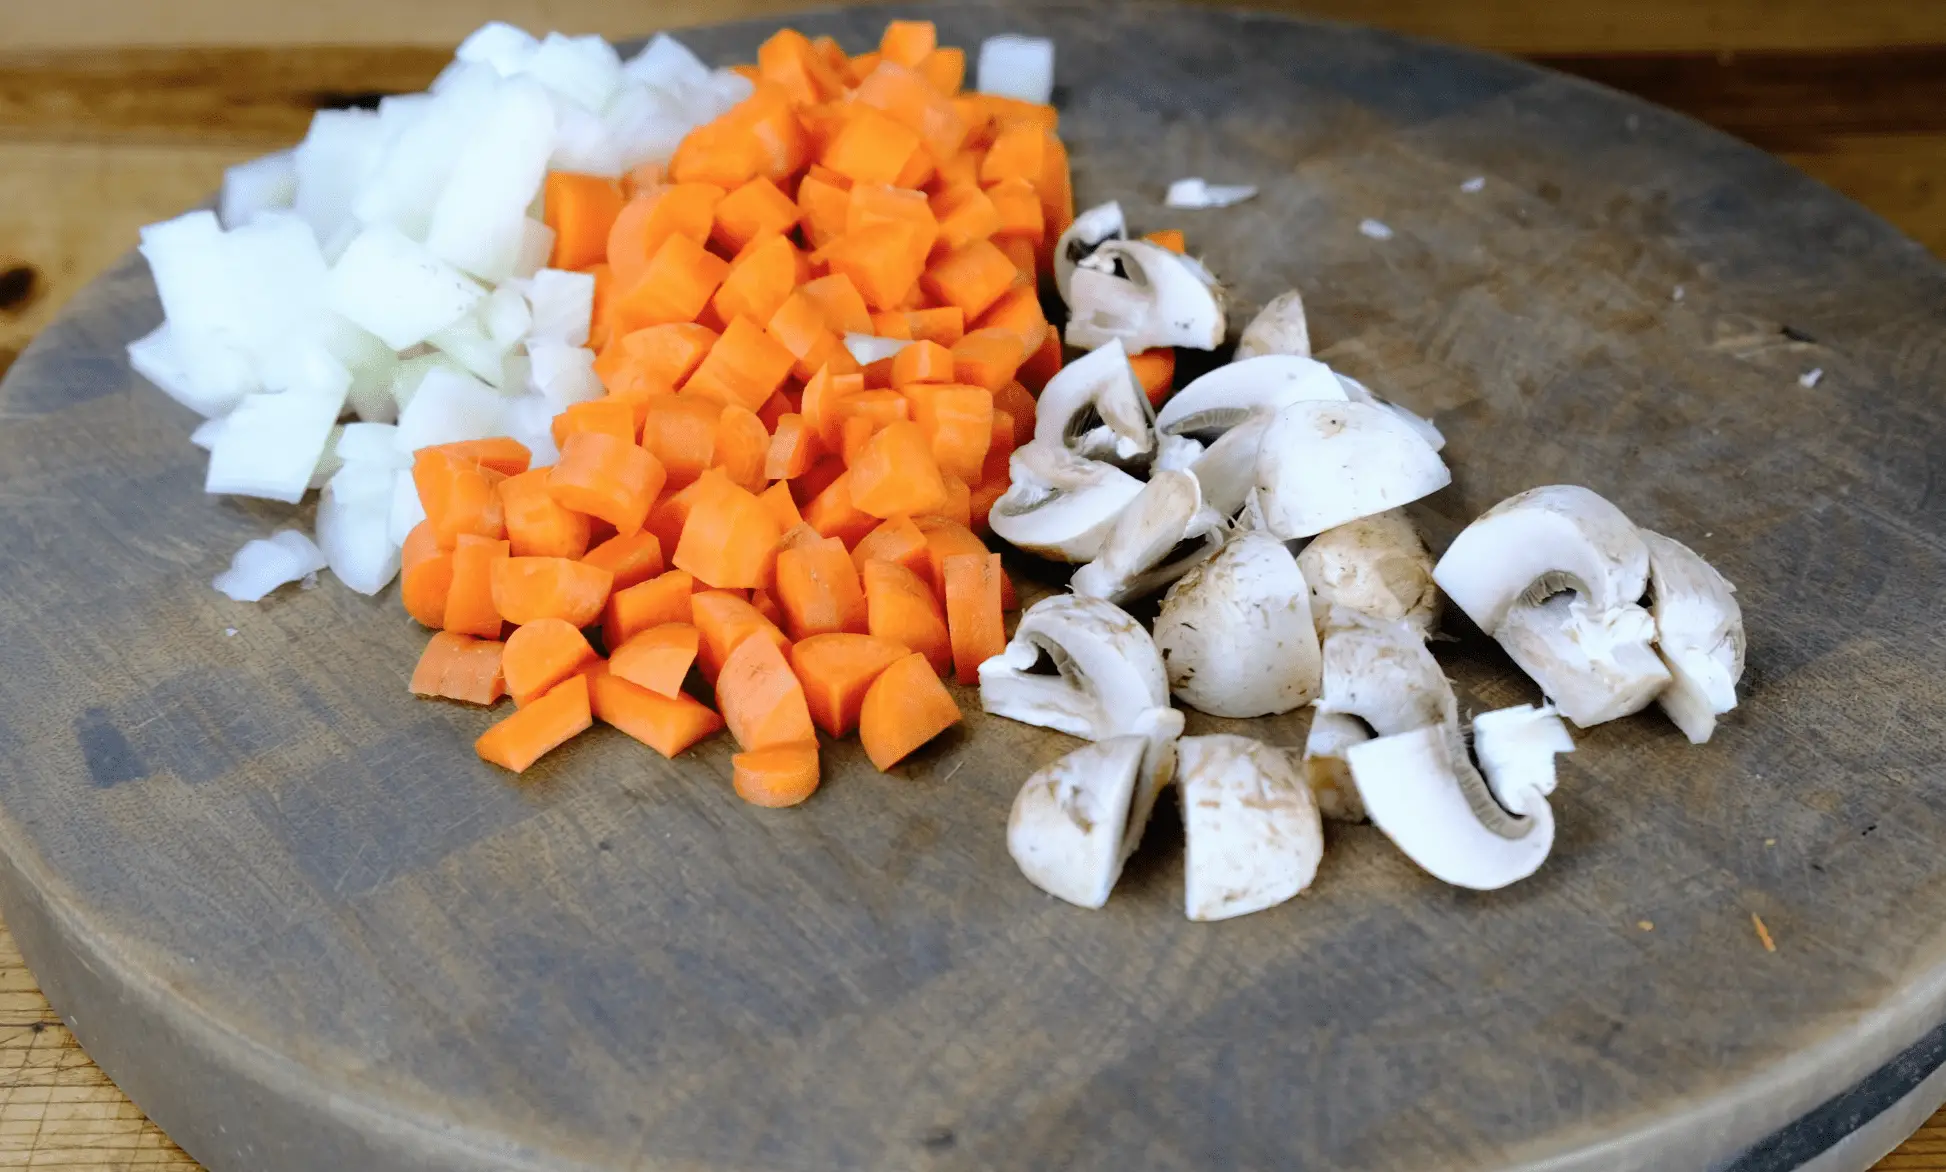 DICED ONIONS, CARROTS, MUSHROOMS FOR SHEPHERDS PIE FILLING